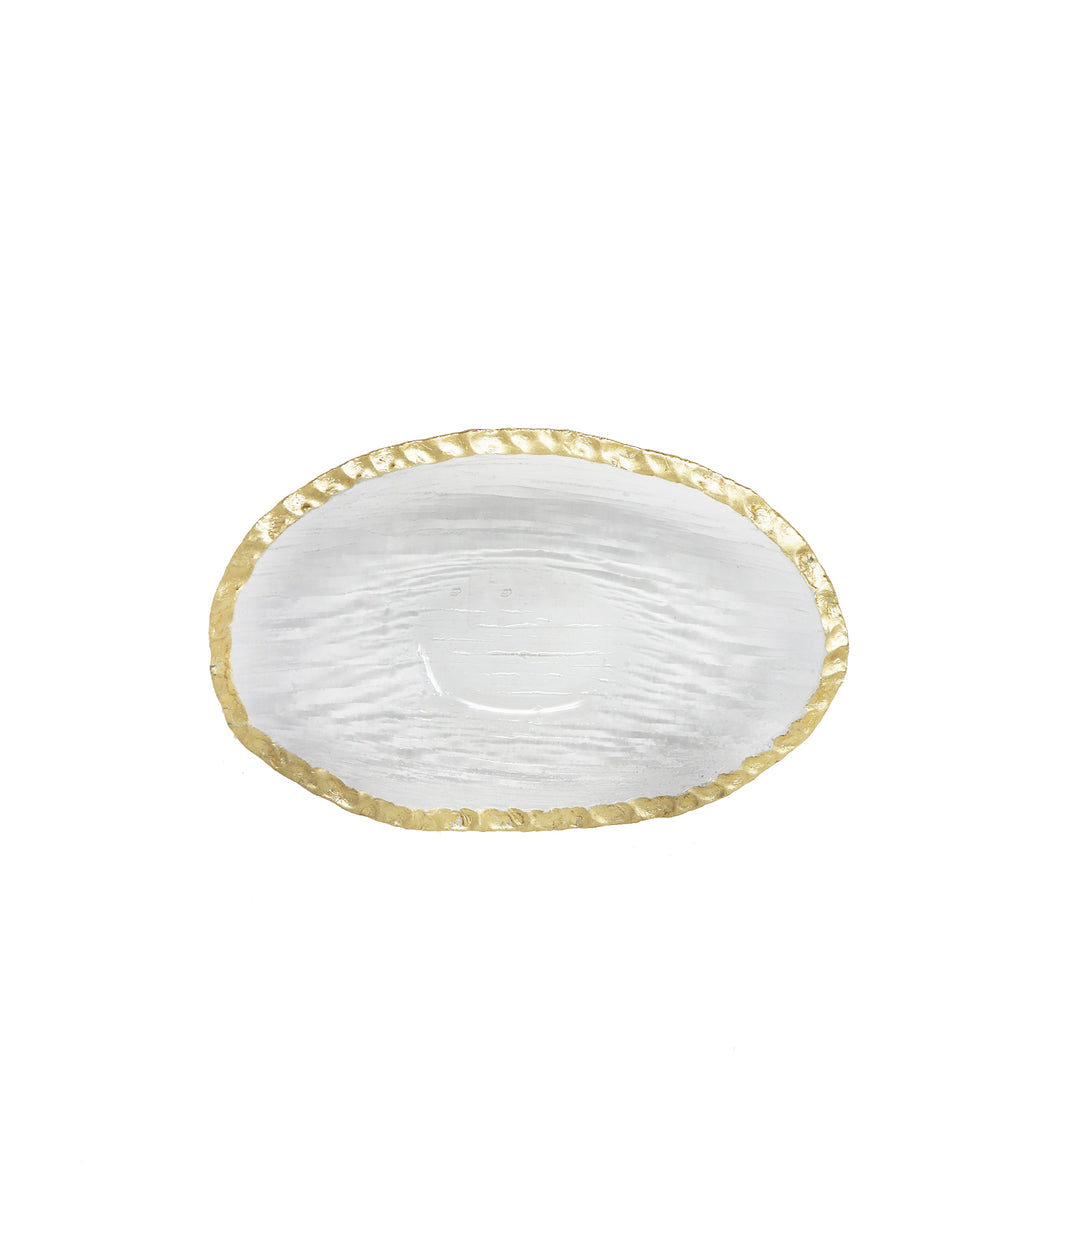 Crystal Oval Bowl with Gold Edge Small - Gabrielle's Biloxi